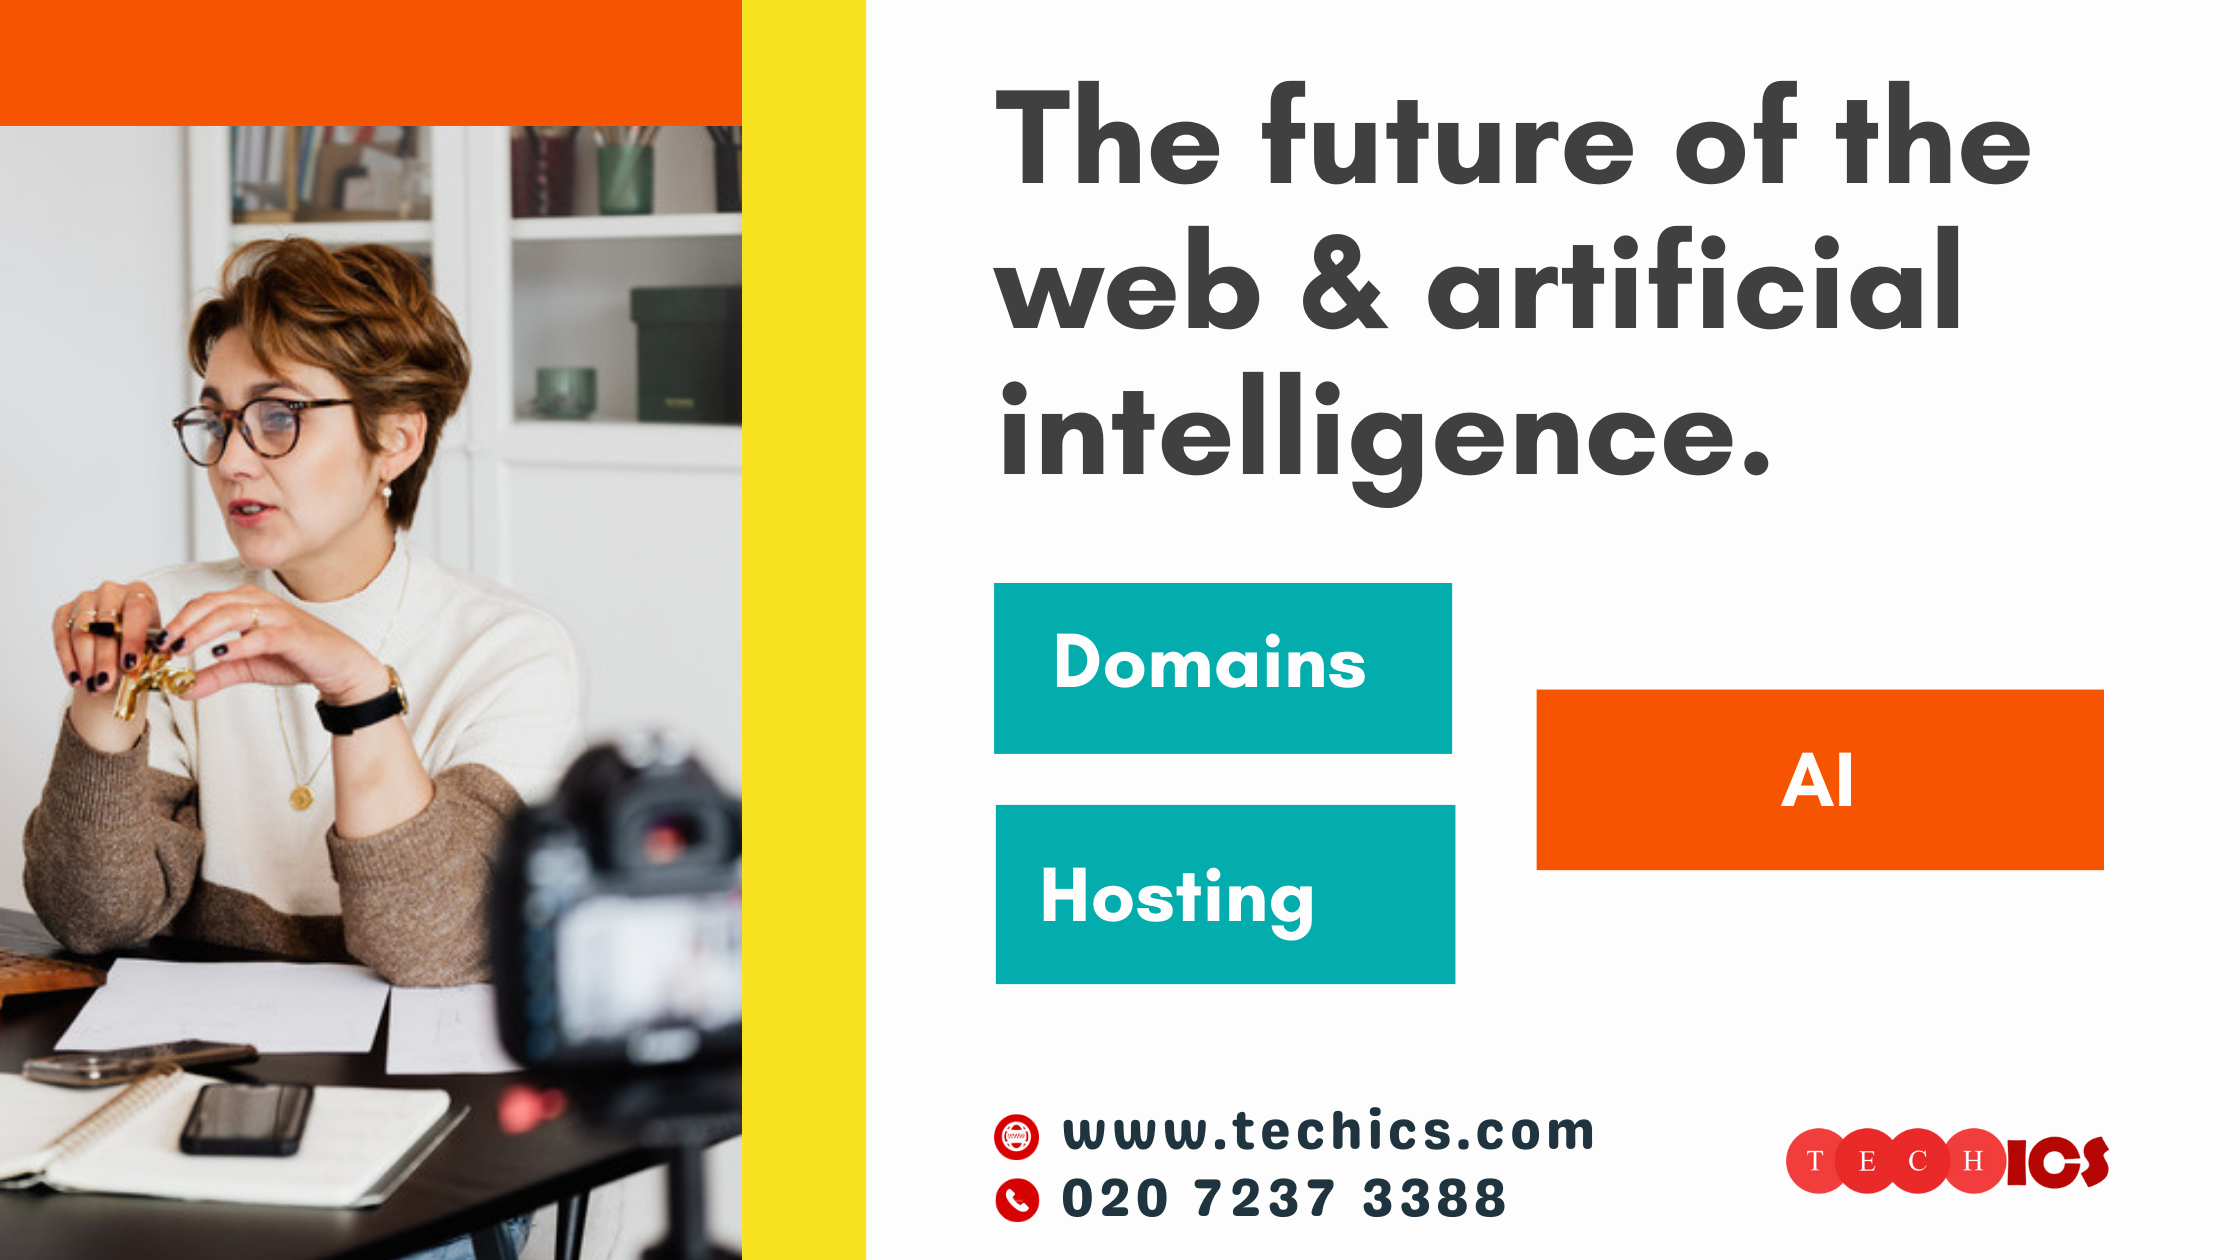 The future of the web and artificial intelligence.